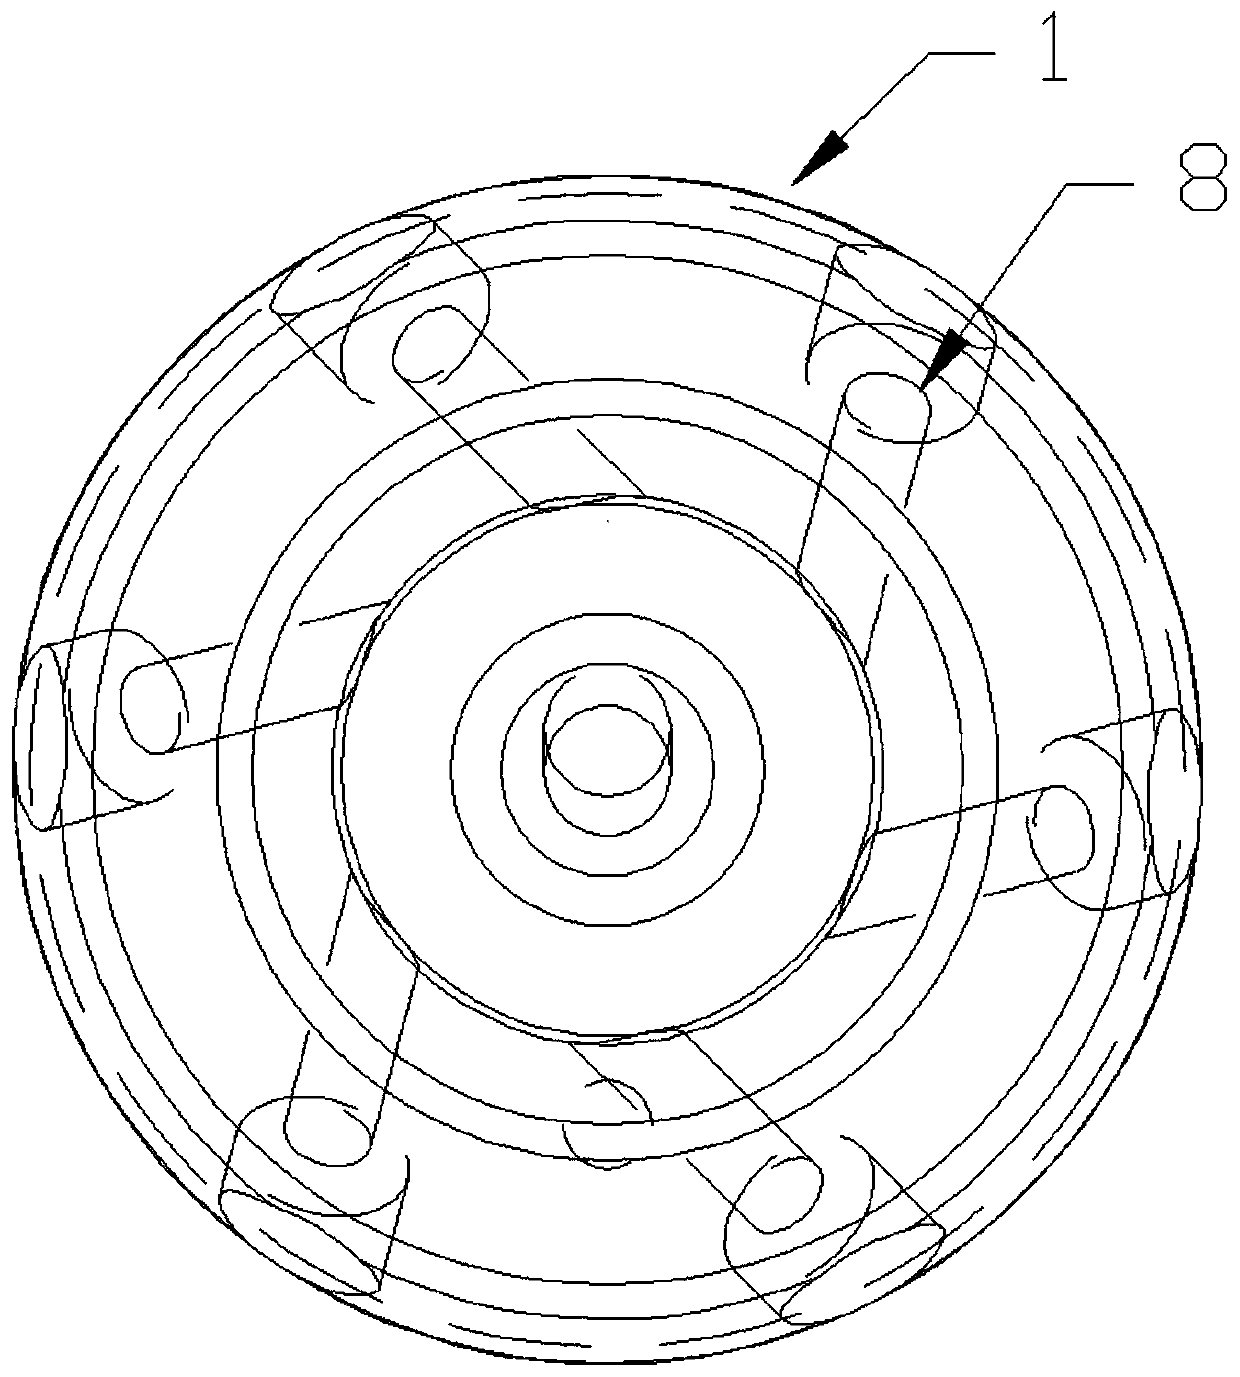 Valve seat and high-pressure inclined inlet nozzle